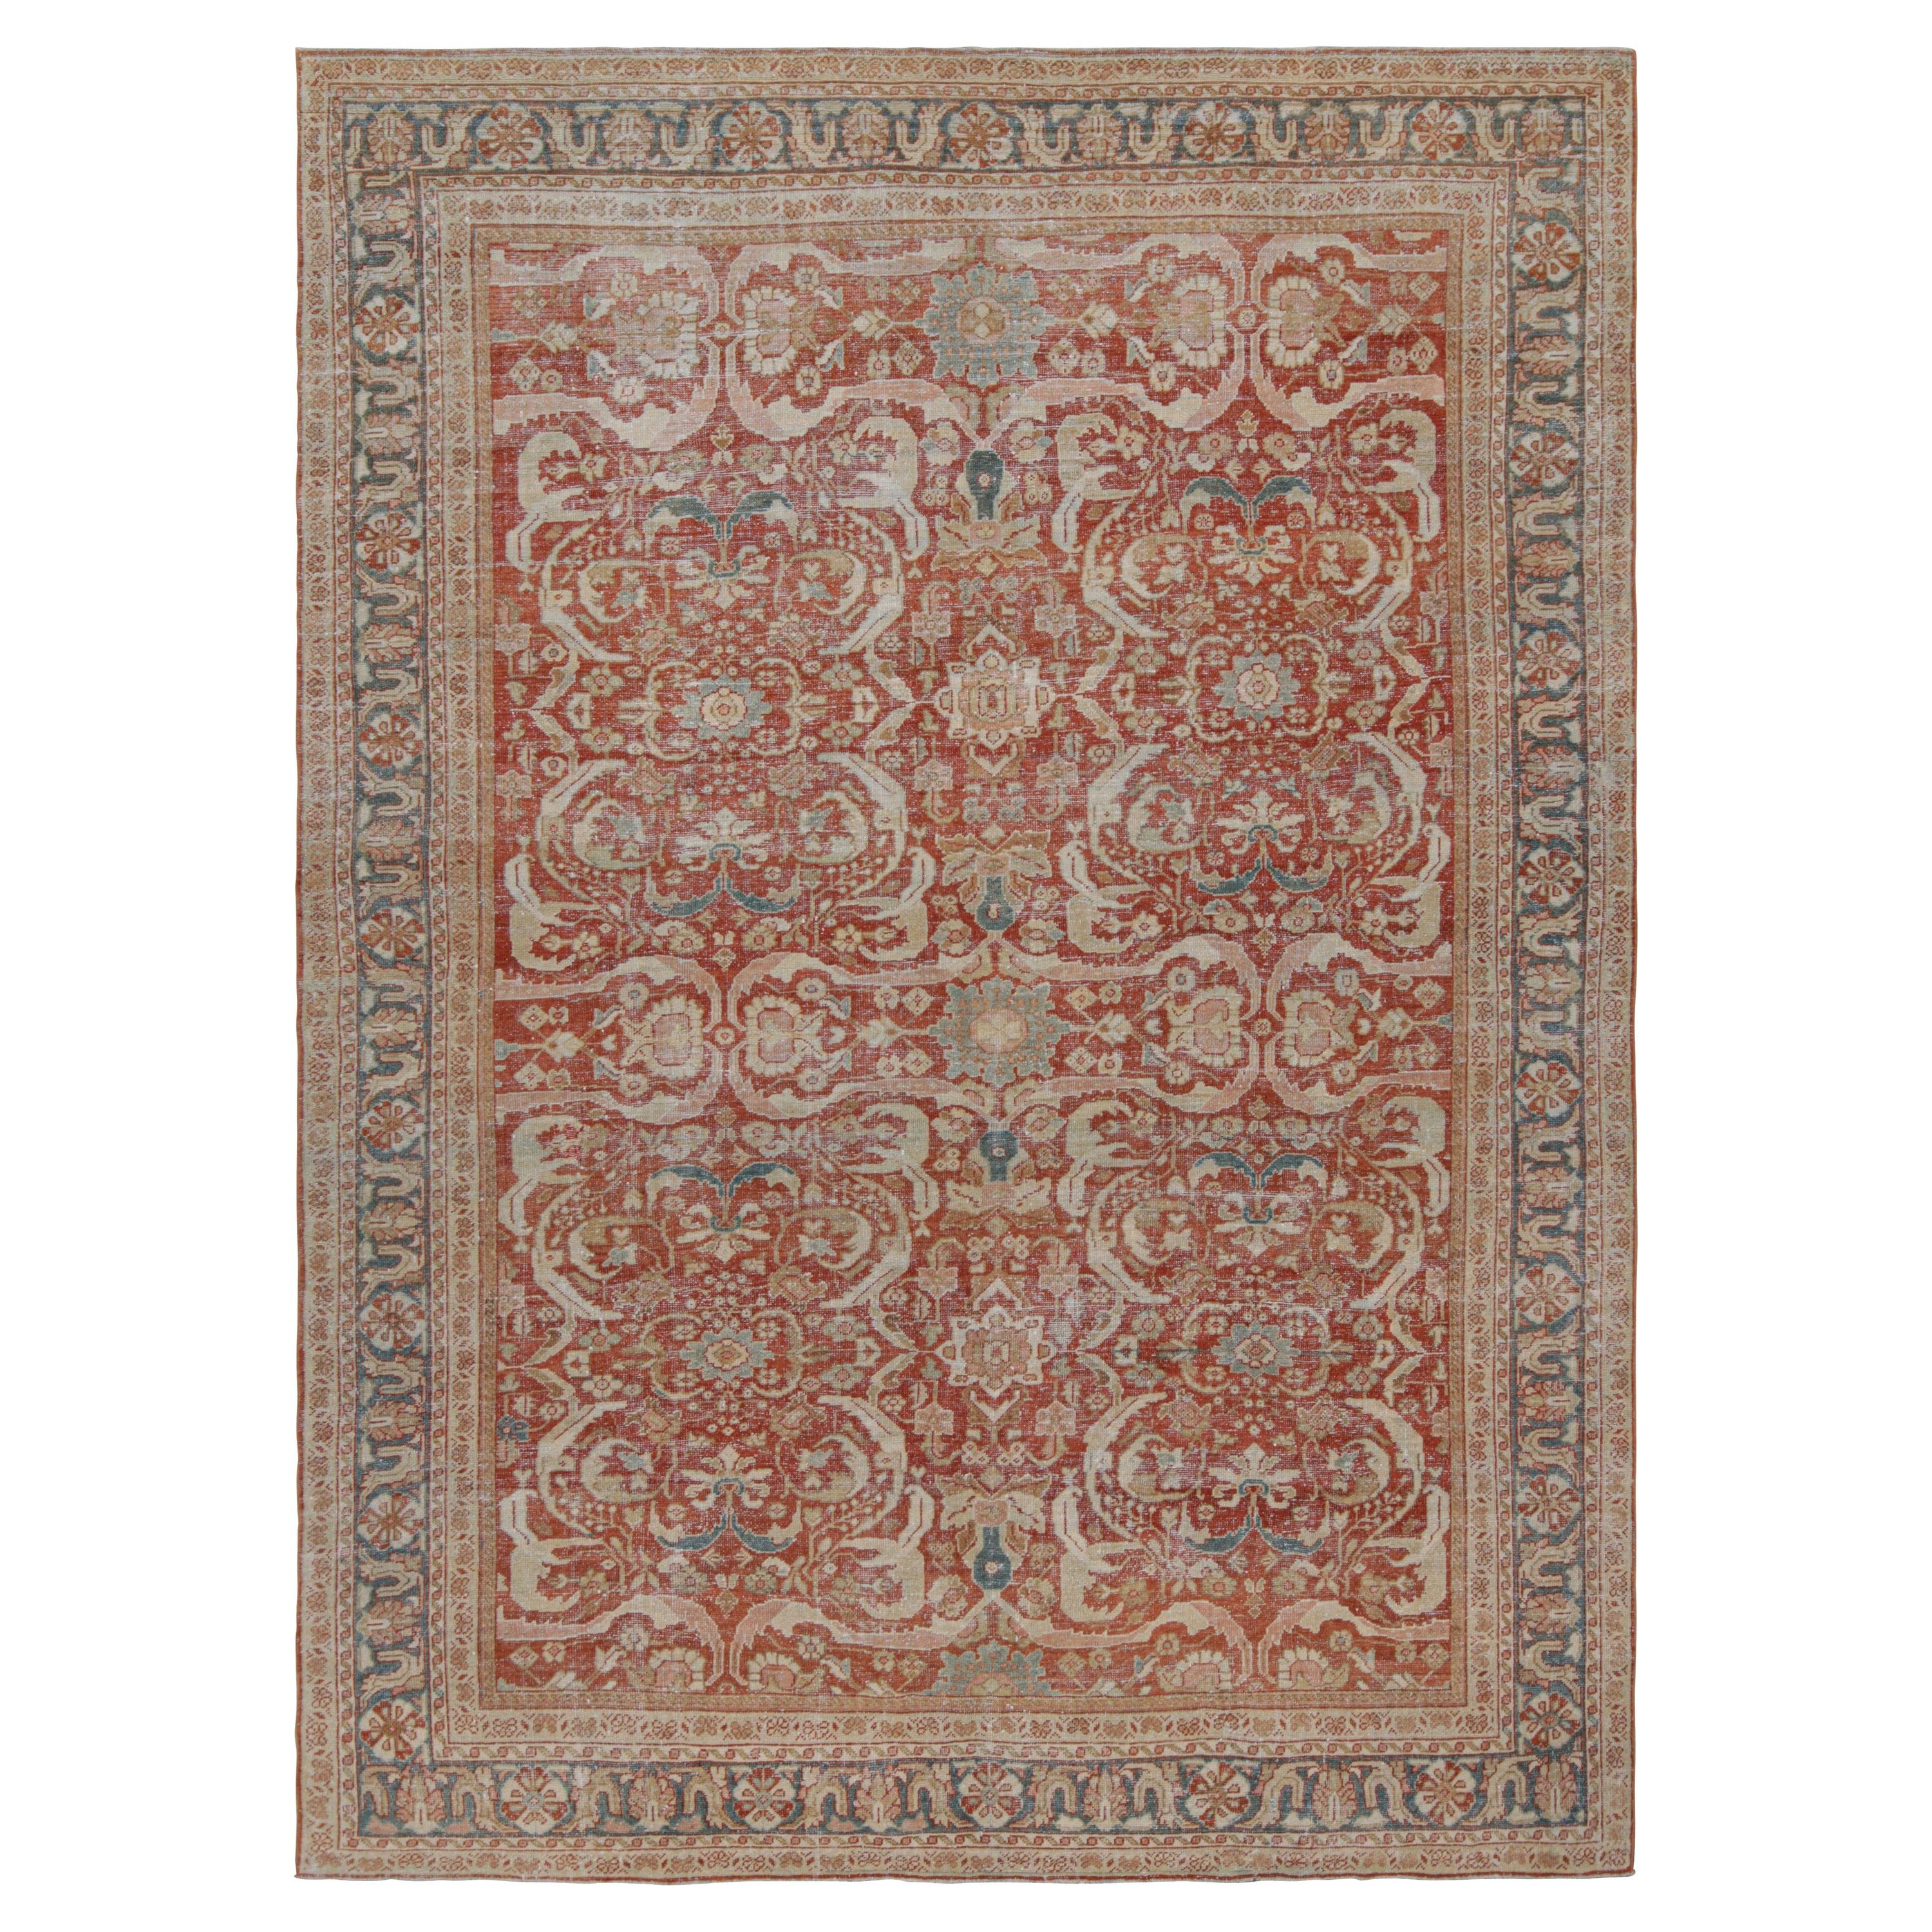 Vintage Oushak-Style European Rug in Red, with Floral Patterns from Rug & Kilim